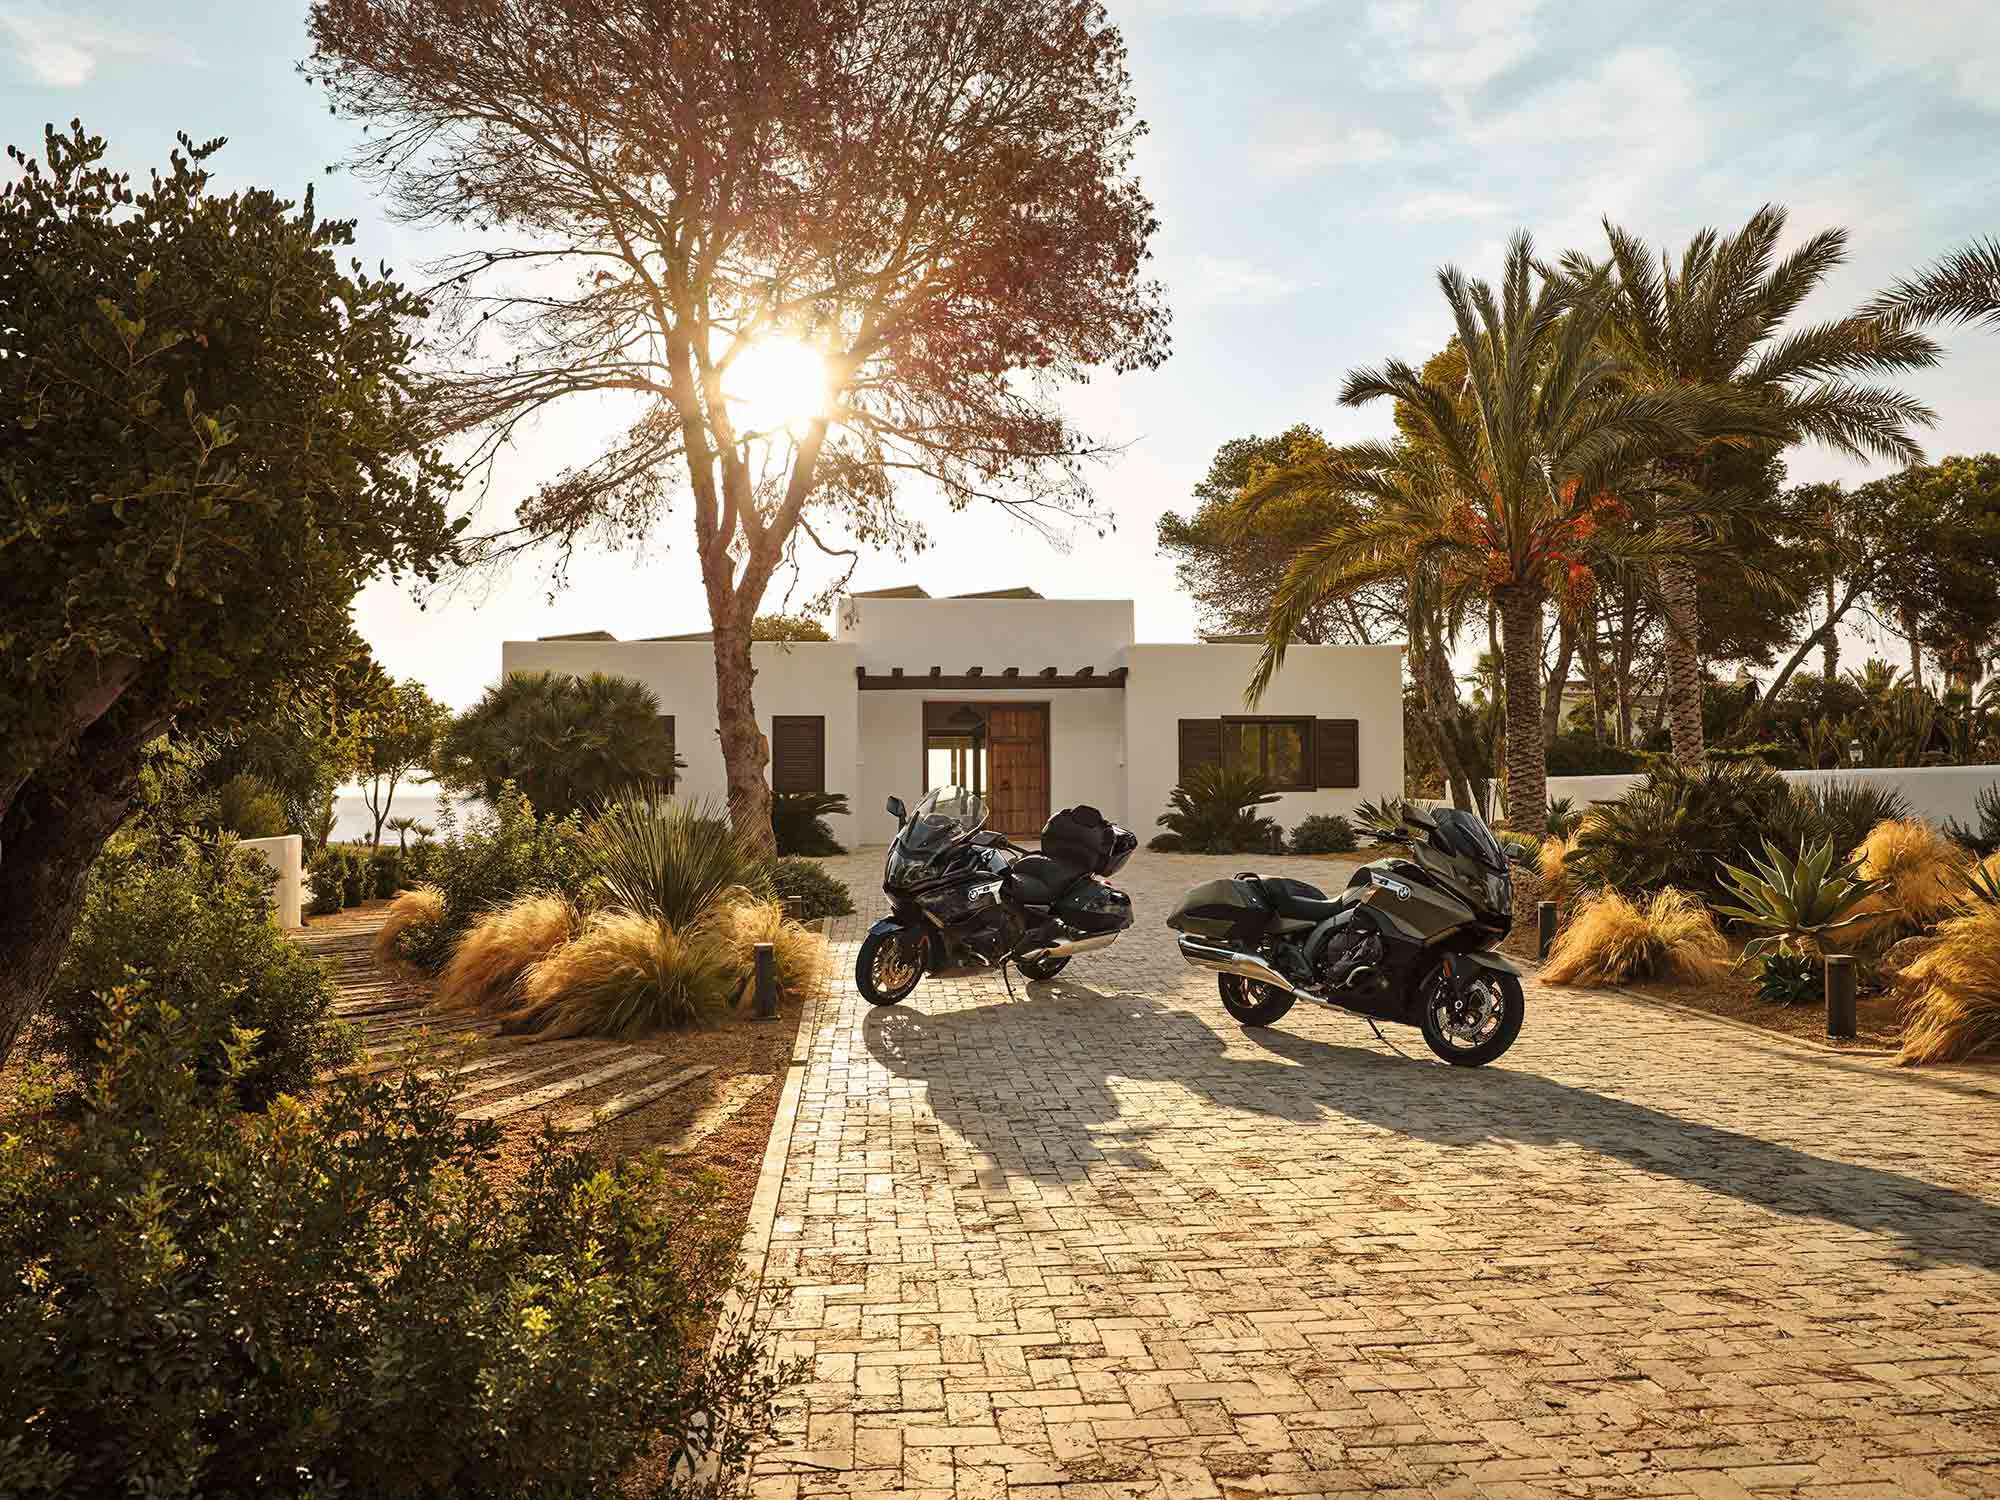 The K 1600 lineup gets more standard amenities than ever before.